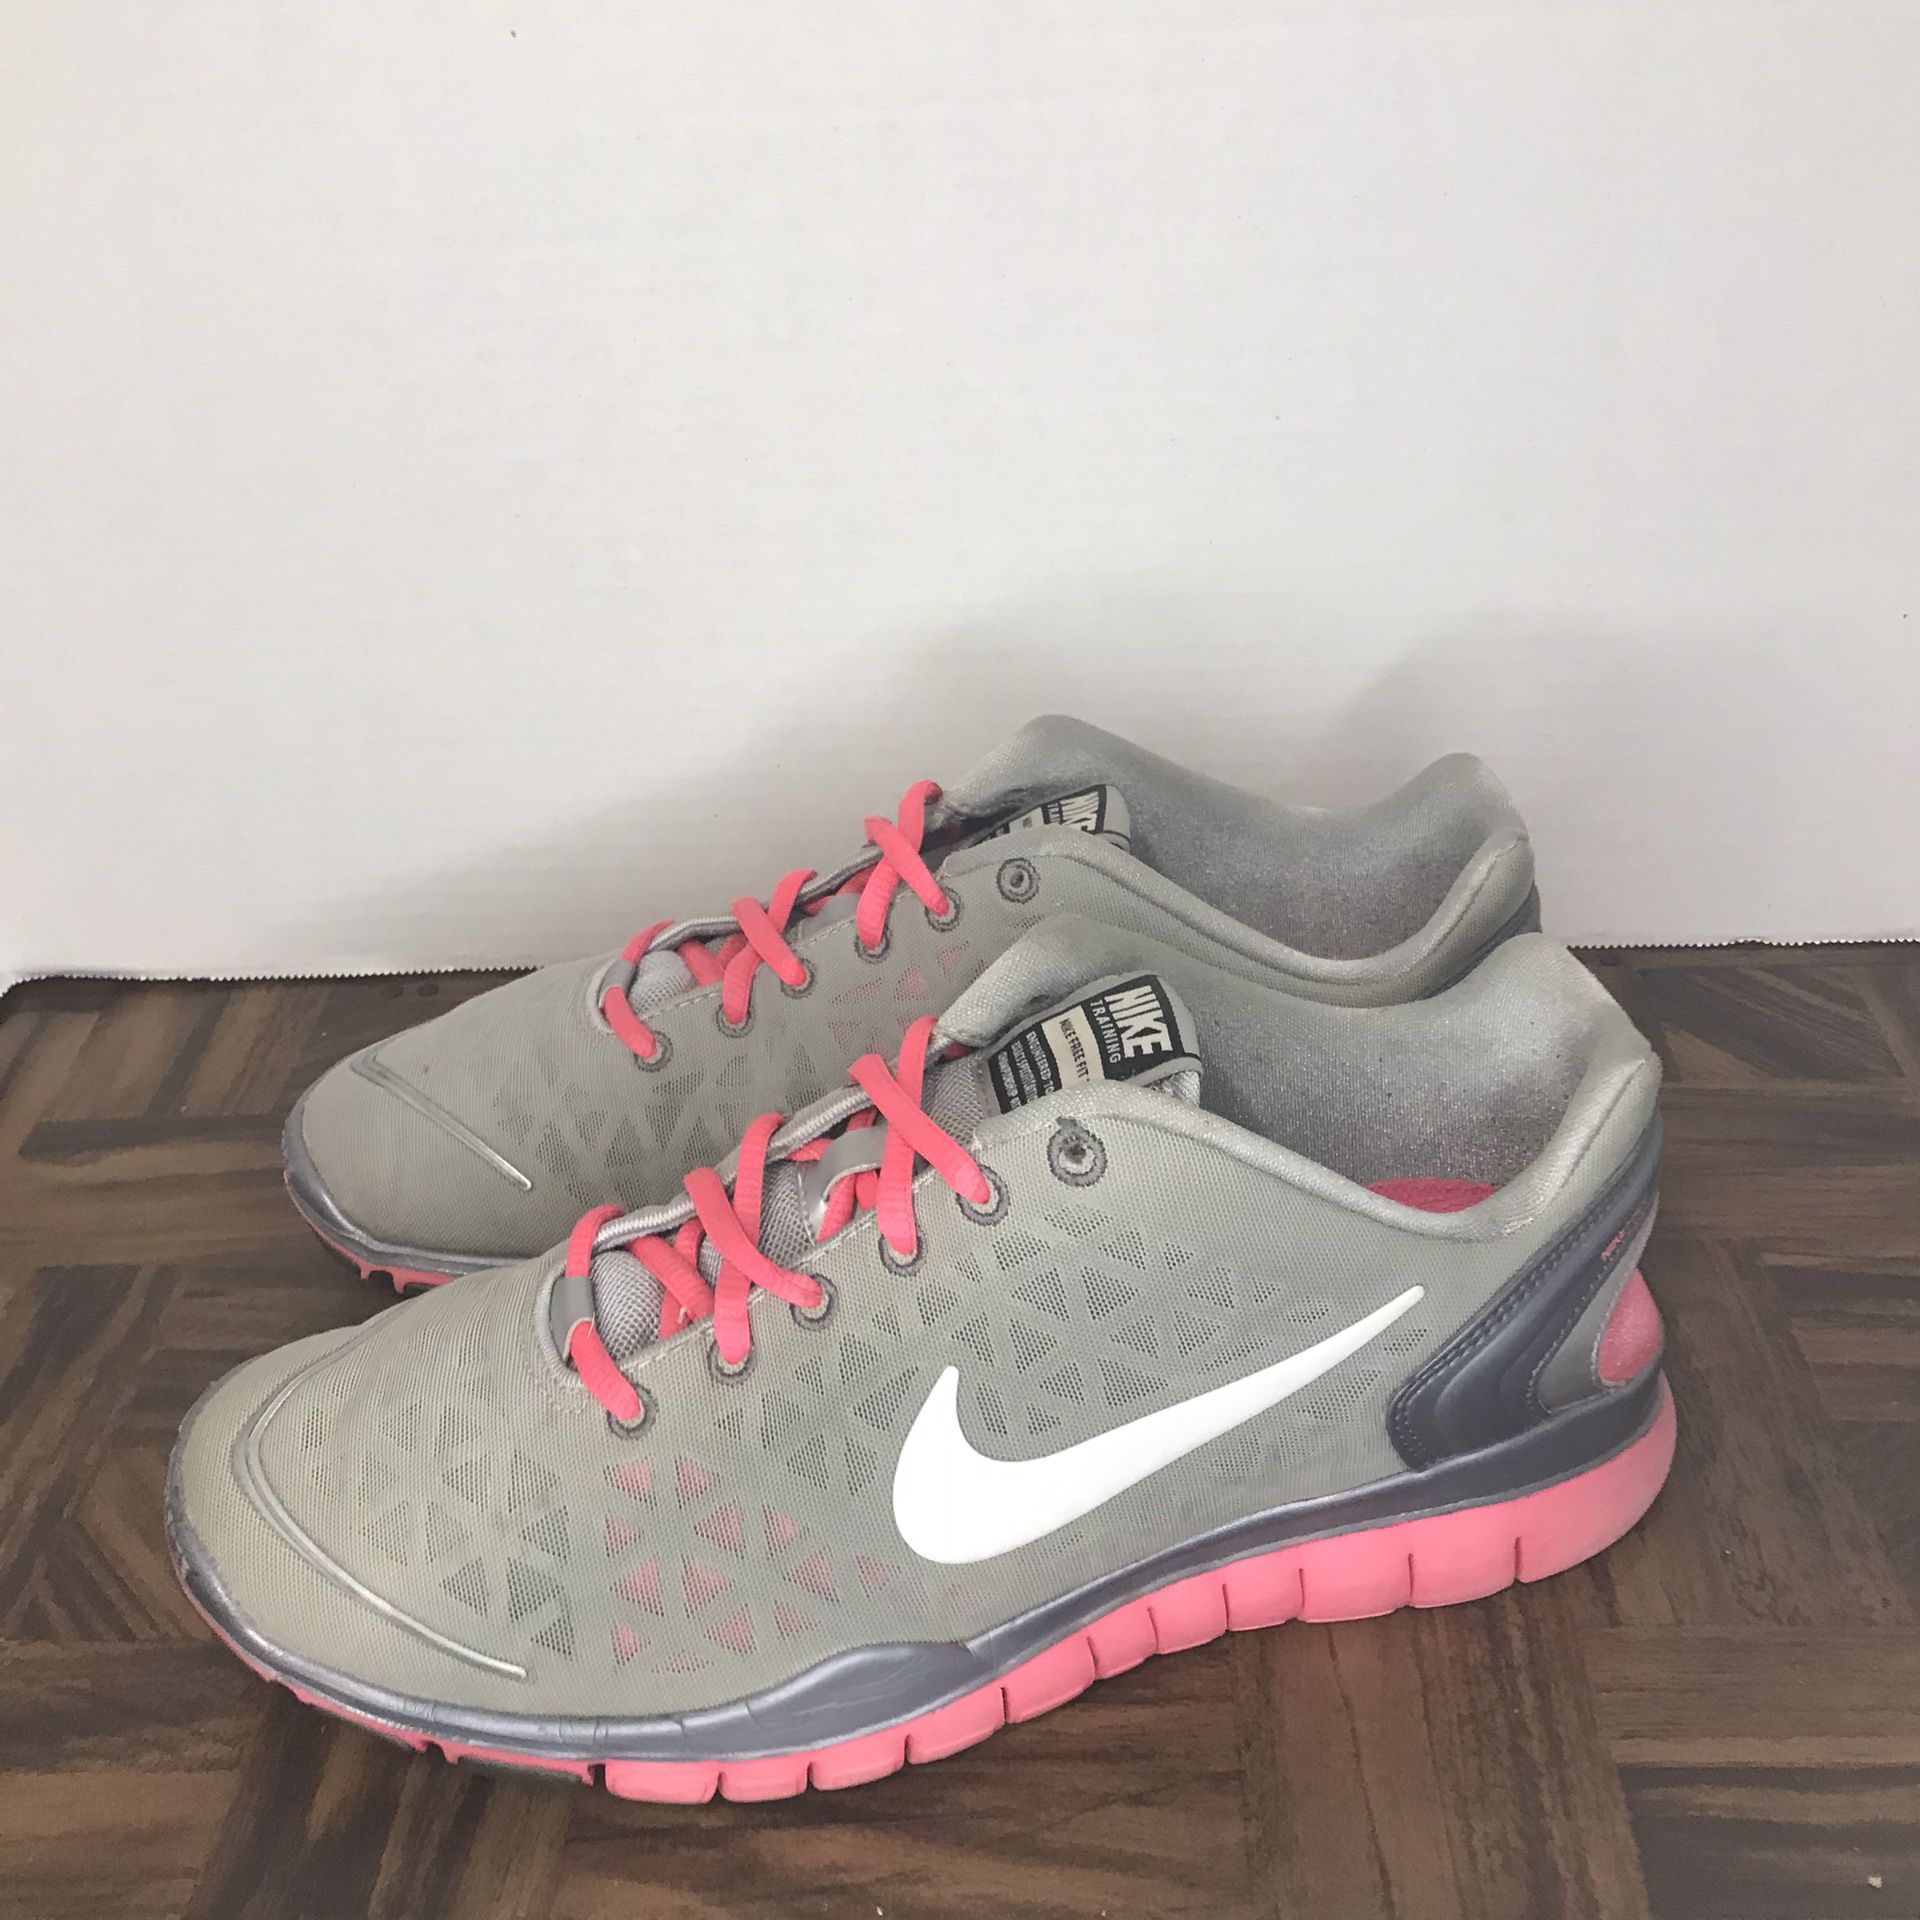 Women’s NIKE Free TR FIT 2 Sneakers. Size 9.5 Pink/Grey ( 487789-003)